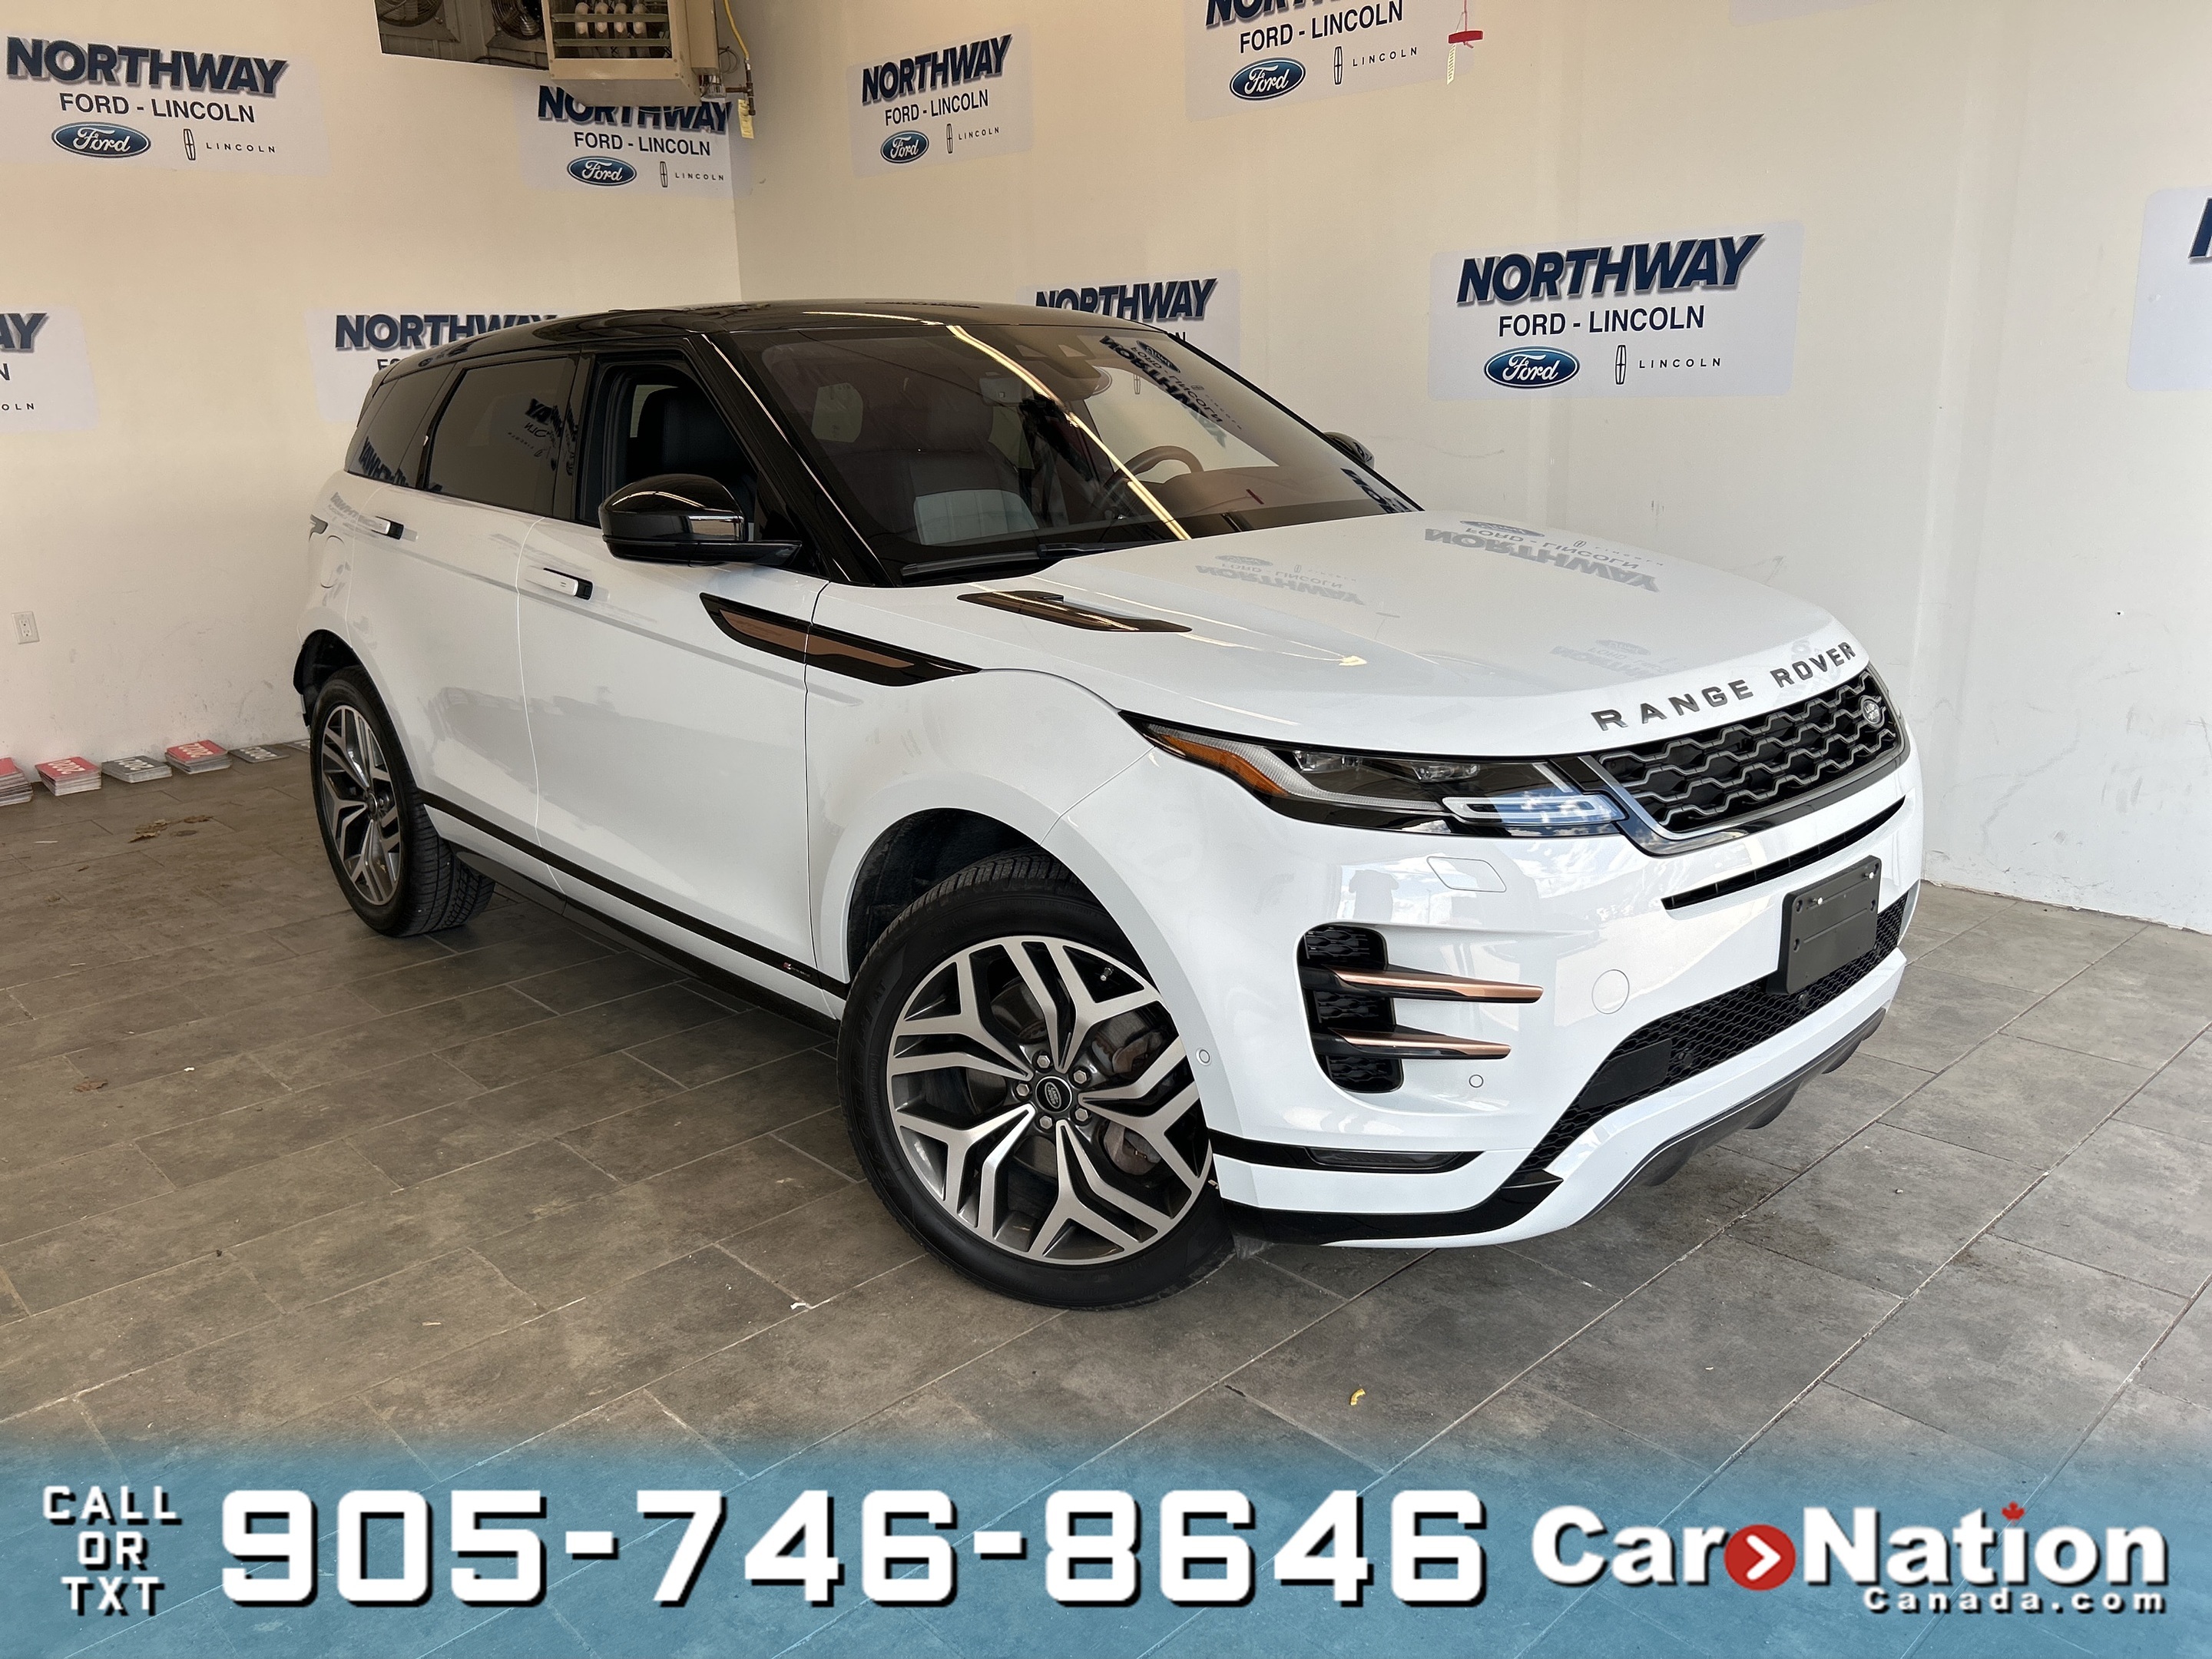 2020 Land Rover Range Rover Evoque P250 FIRST EDITION | AWD |LEATHER | PANO ROOF |NAV